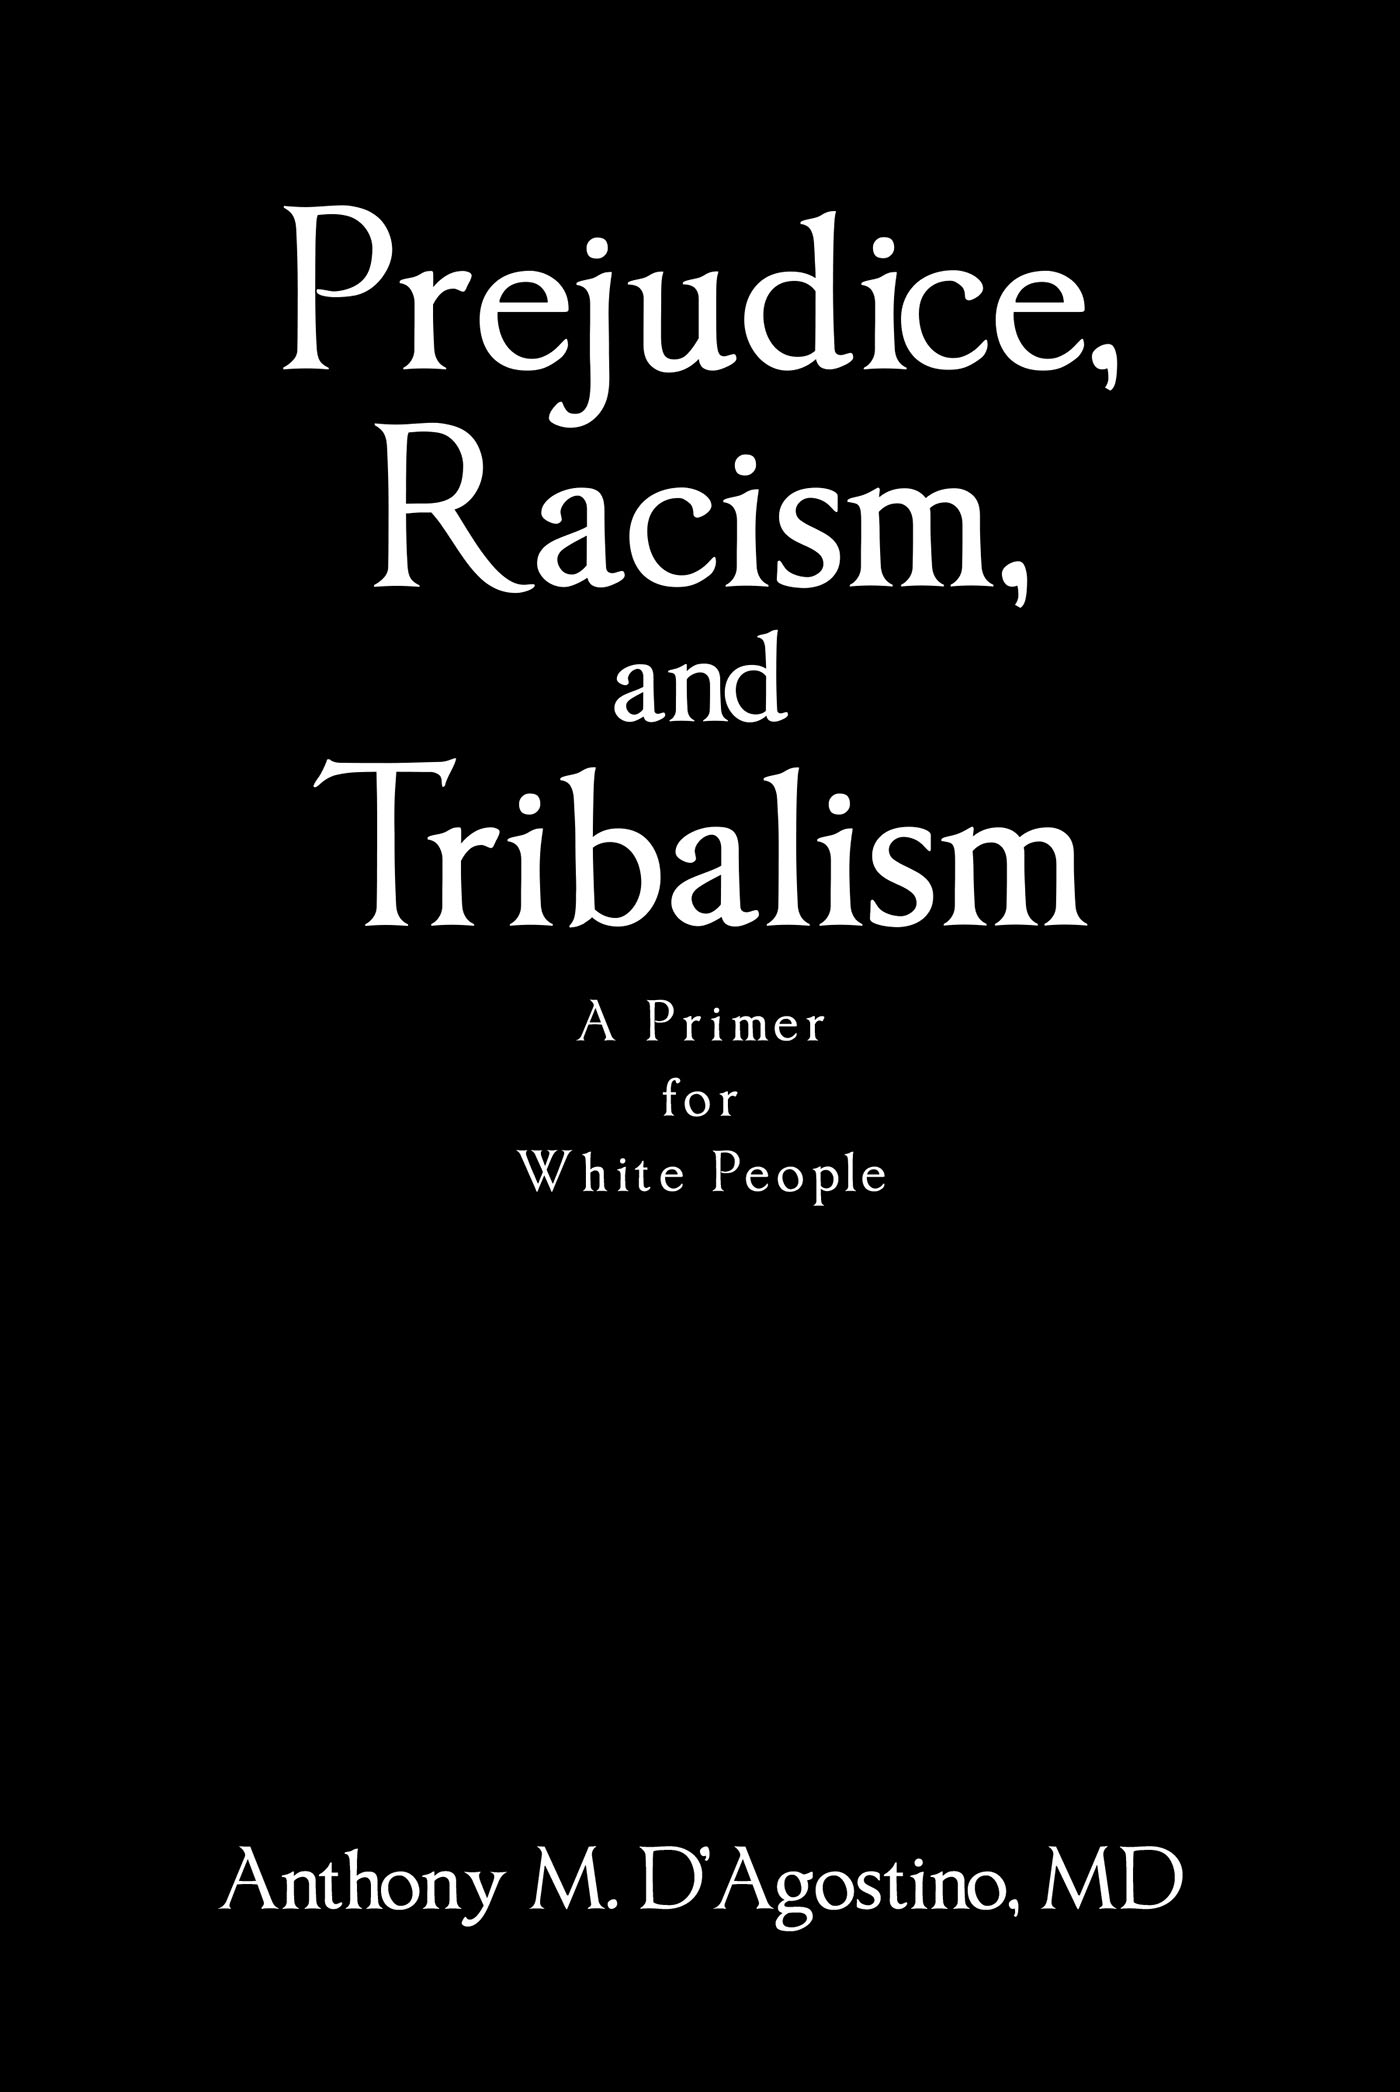 Author Anthony M. D'Agostino, MD’s New Book, “Prejudice, Racism, and Tribalism: A Primer for White People,” Explores How One Must Approach Prejudice in Order to Stop It